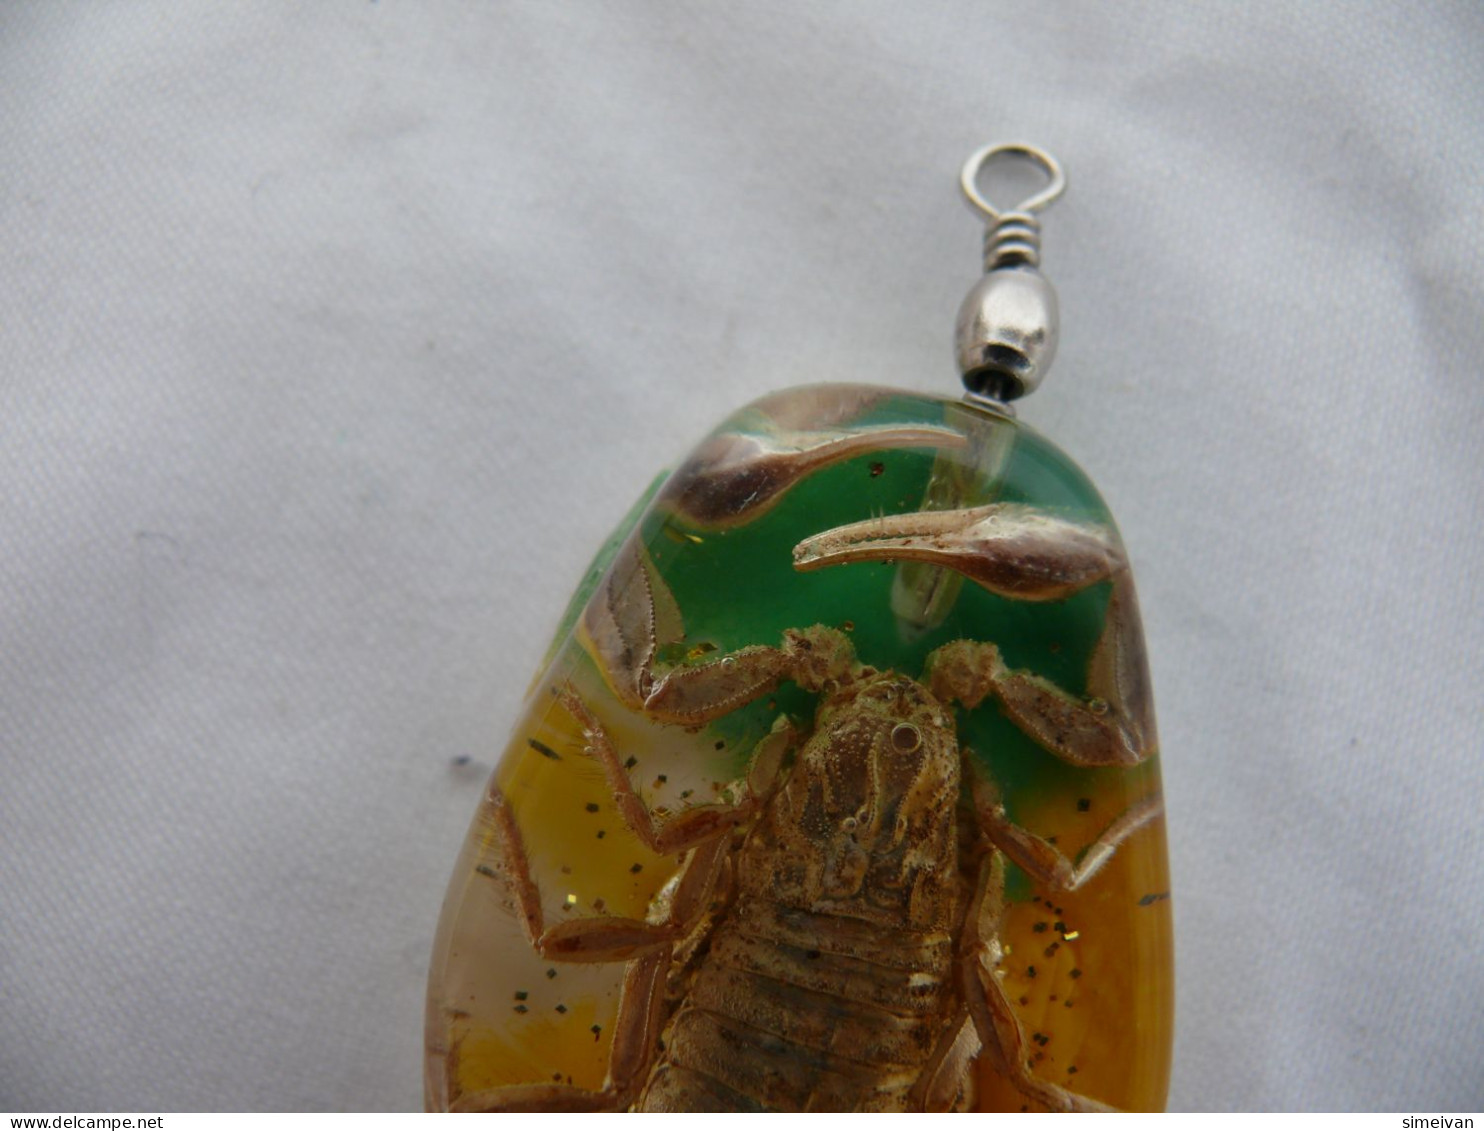 REAL GOLD SCORPION GLOW LUCITE NECKLACE PENDANT INSECT JEWELRY TAXIDERMY #1851 - Hangers